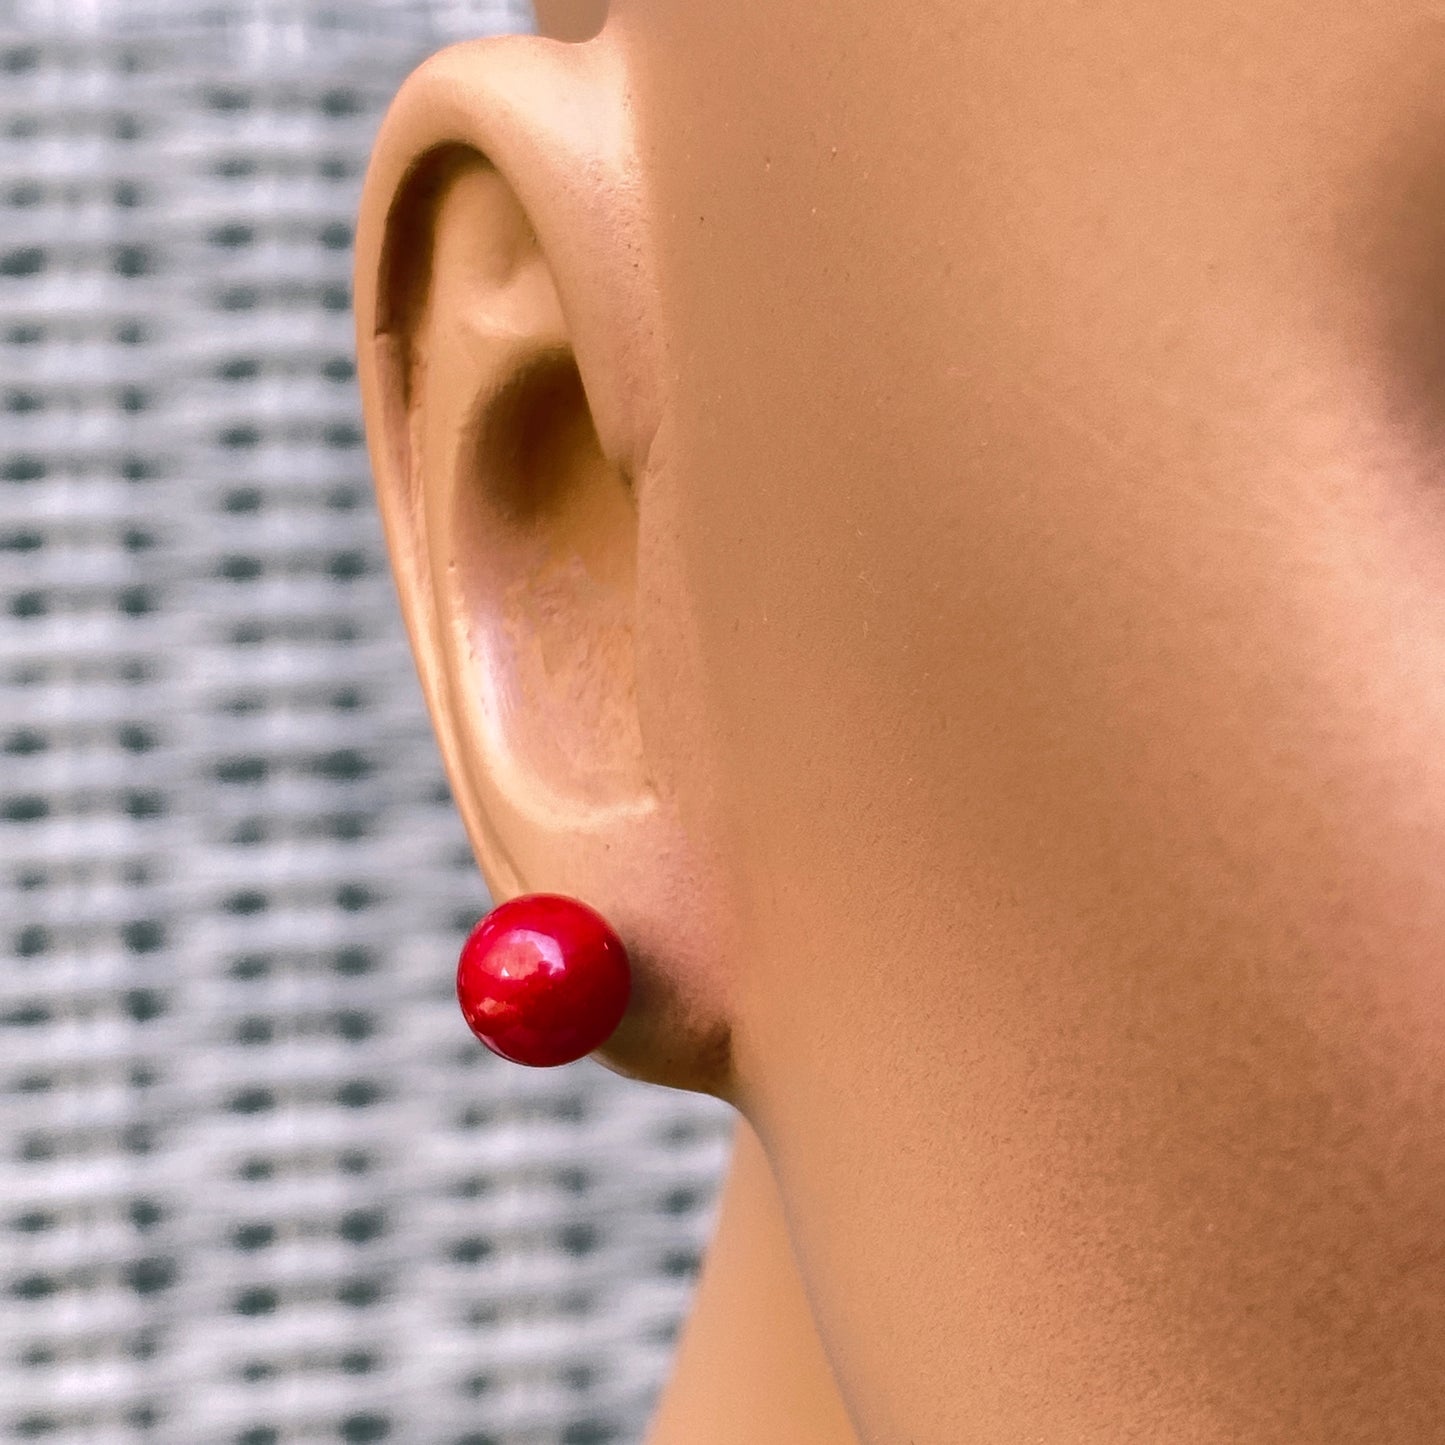 Red Coral Stud Earrings on Sterling Silver Posts